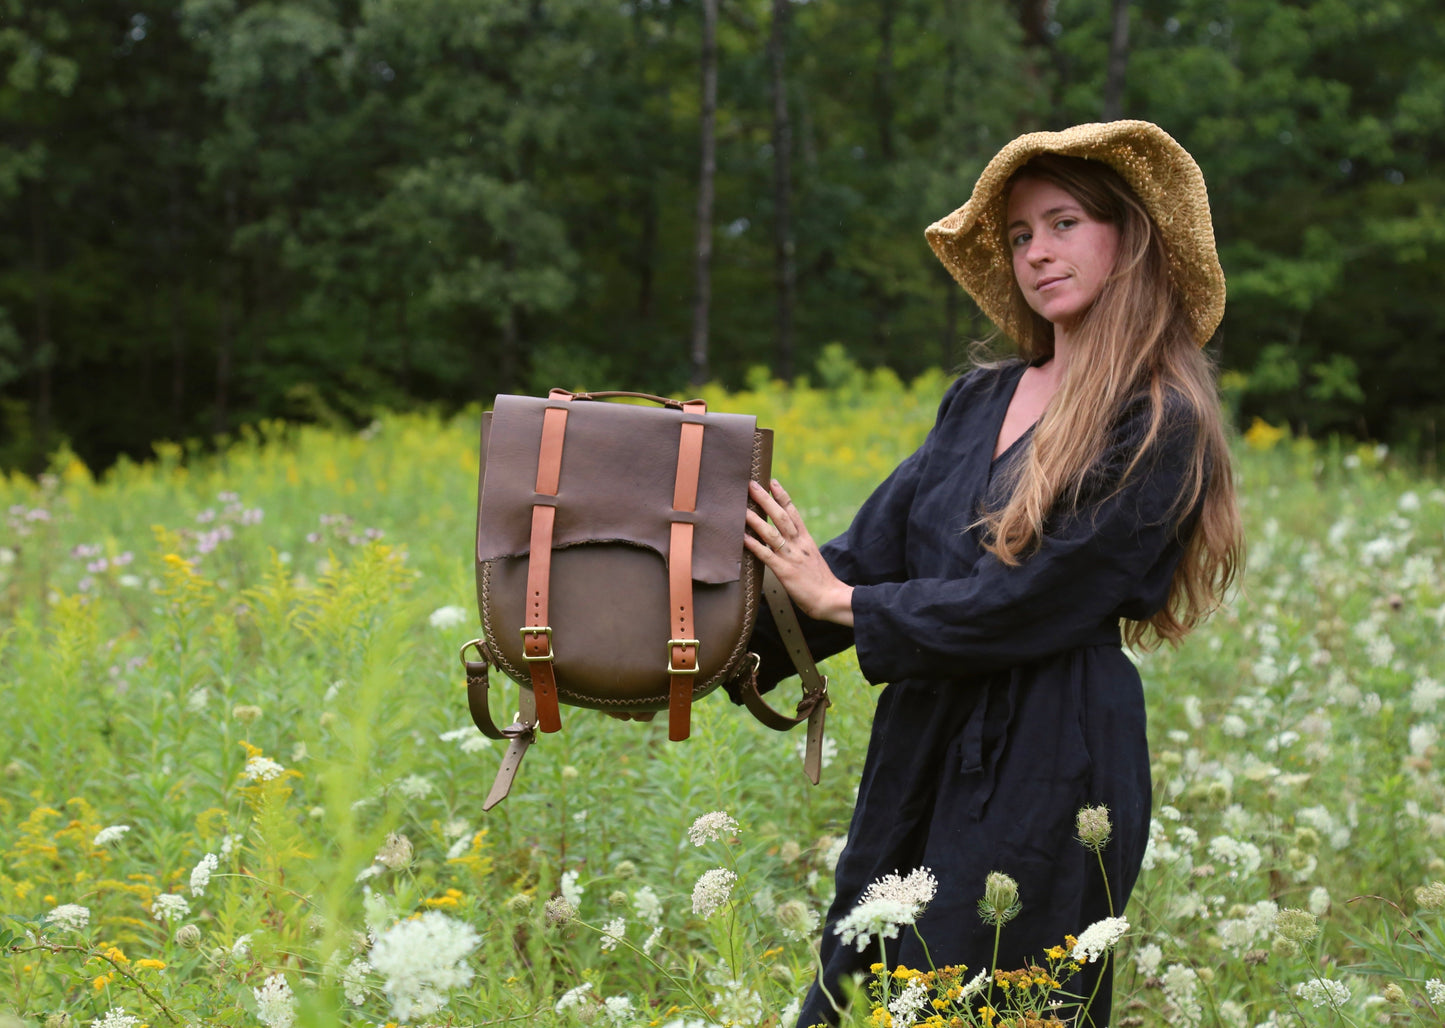 Crystal Van Gaasbeck of Under the Tree Farm, with a leather backpack she made. The backpack is for sale online